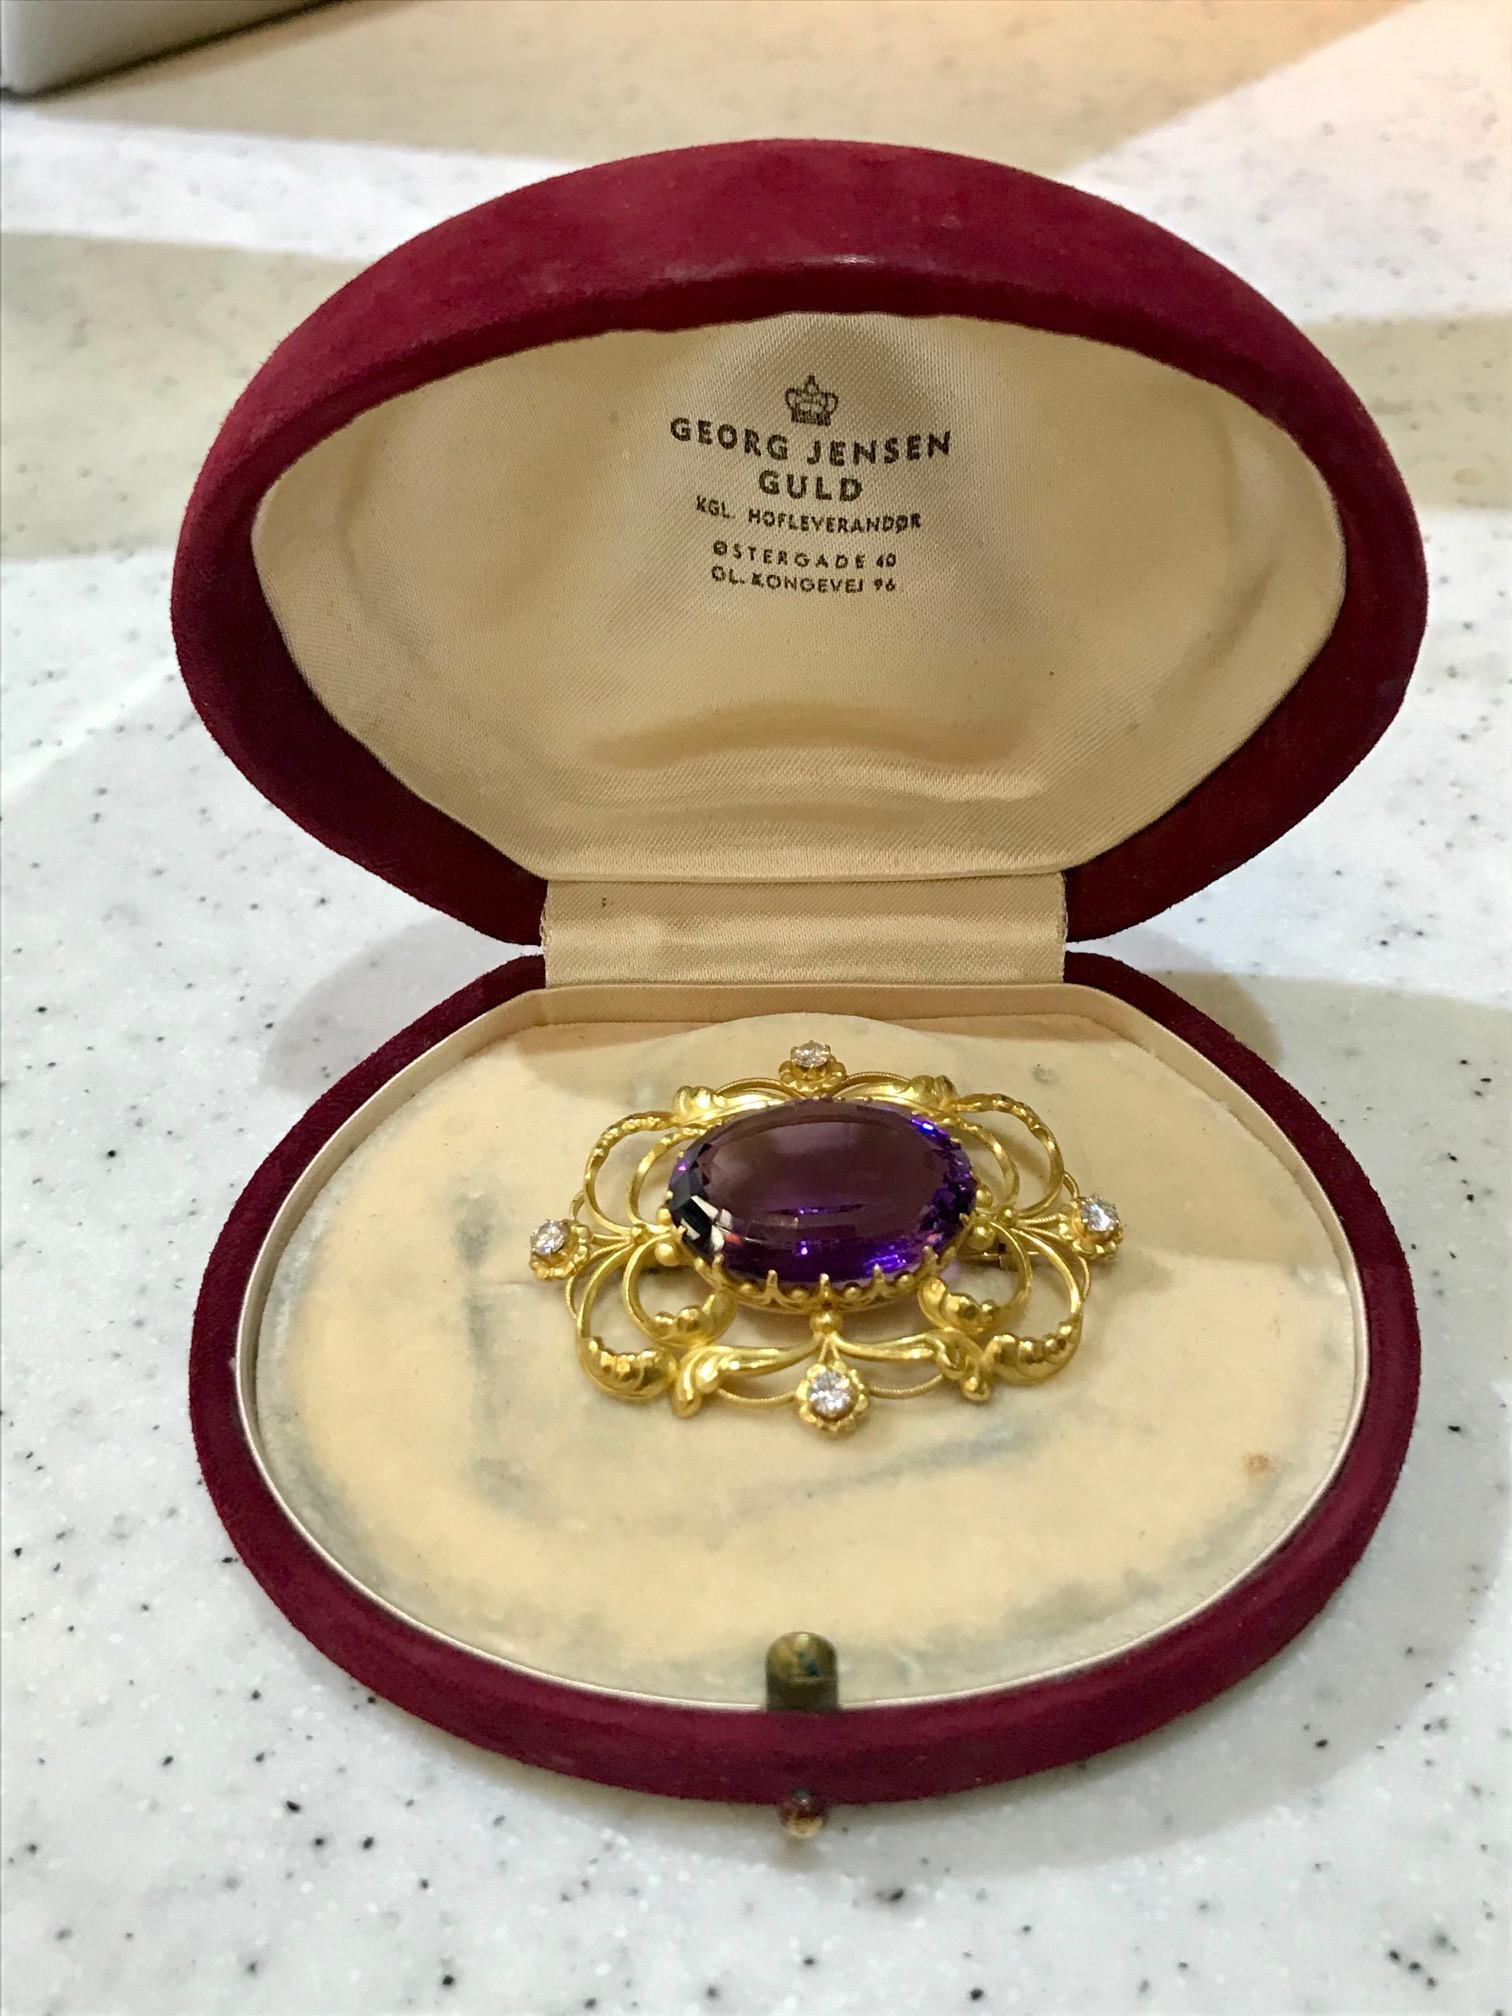 This is an 18kt gold Georg Jensen Art Nouveau brooch with a large oval cut amethyst stone and four small diamonds, design #21 by Georg Jensen. The diamonds are VS2.SI1 and are combined approximately 0.25ct.

The brooch measures 2